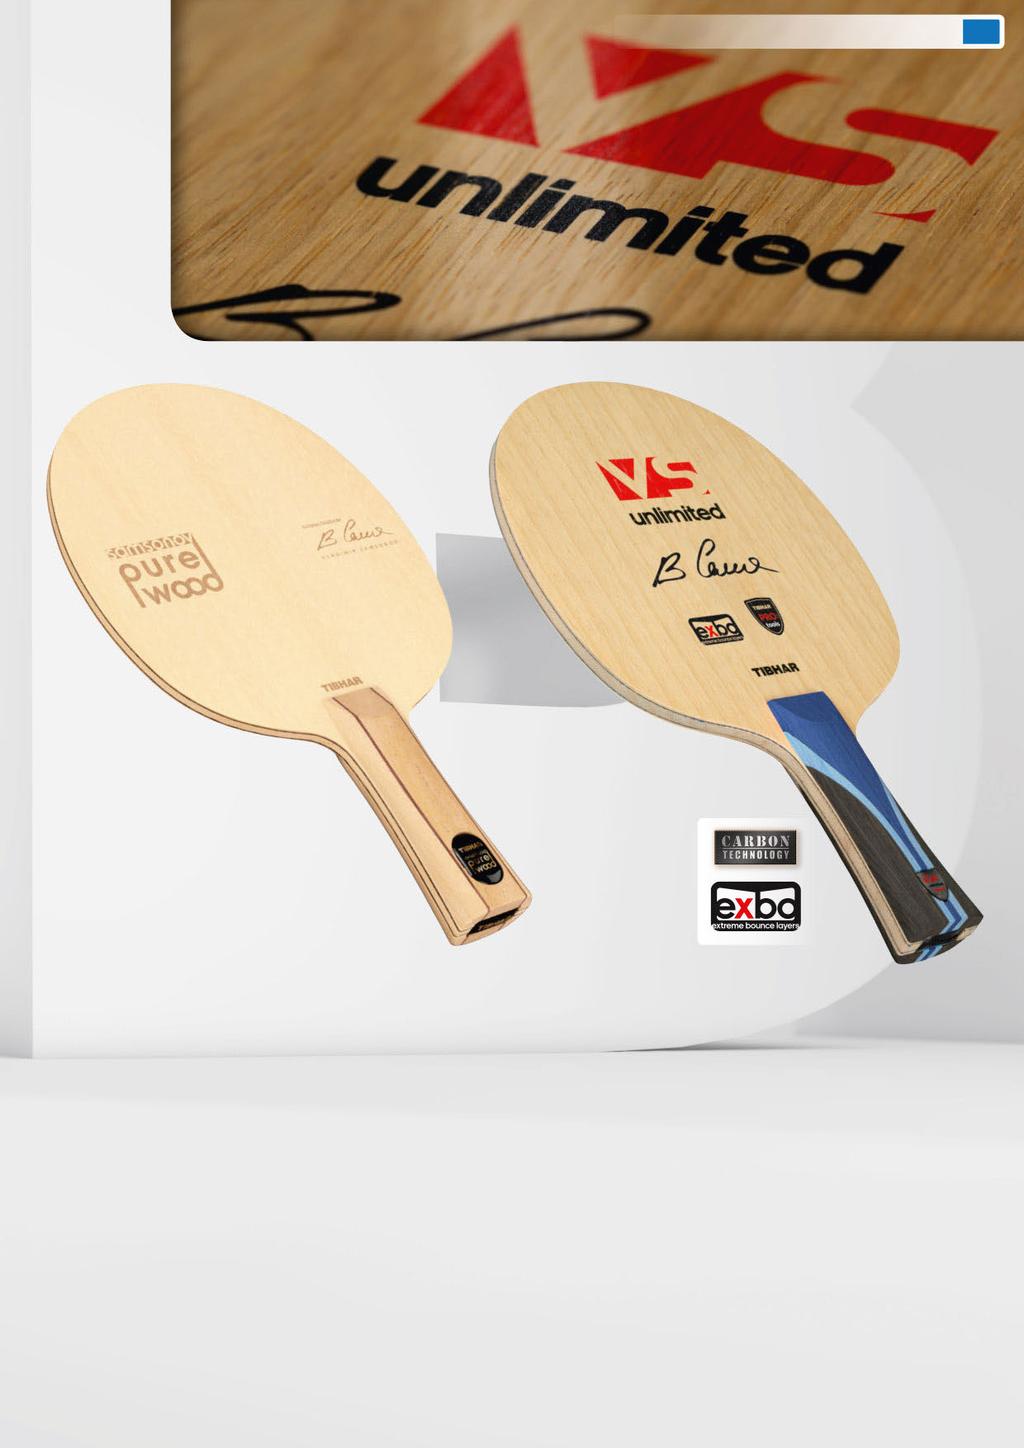 SAMSONOV 31 SAMSONOV PURE WOOD 5-ply Allround blade, maintaining the playing characteristics that Vladimir Samsonov is renowned for after two decades as a world table tennis leader.